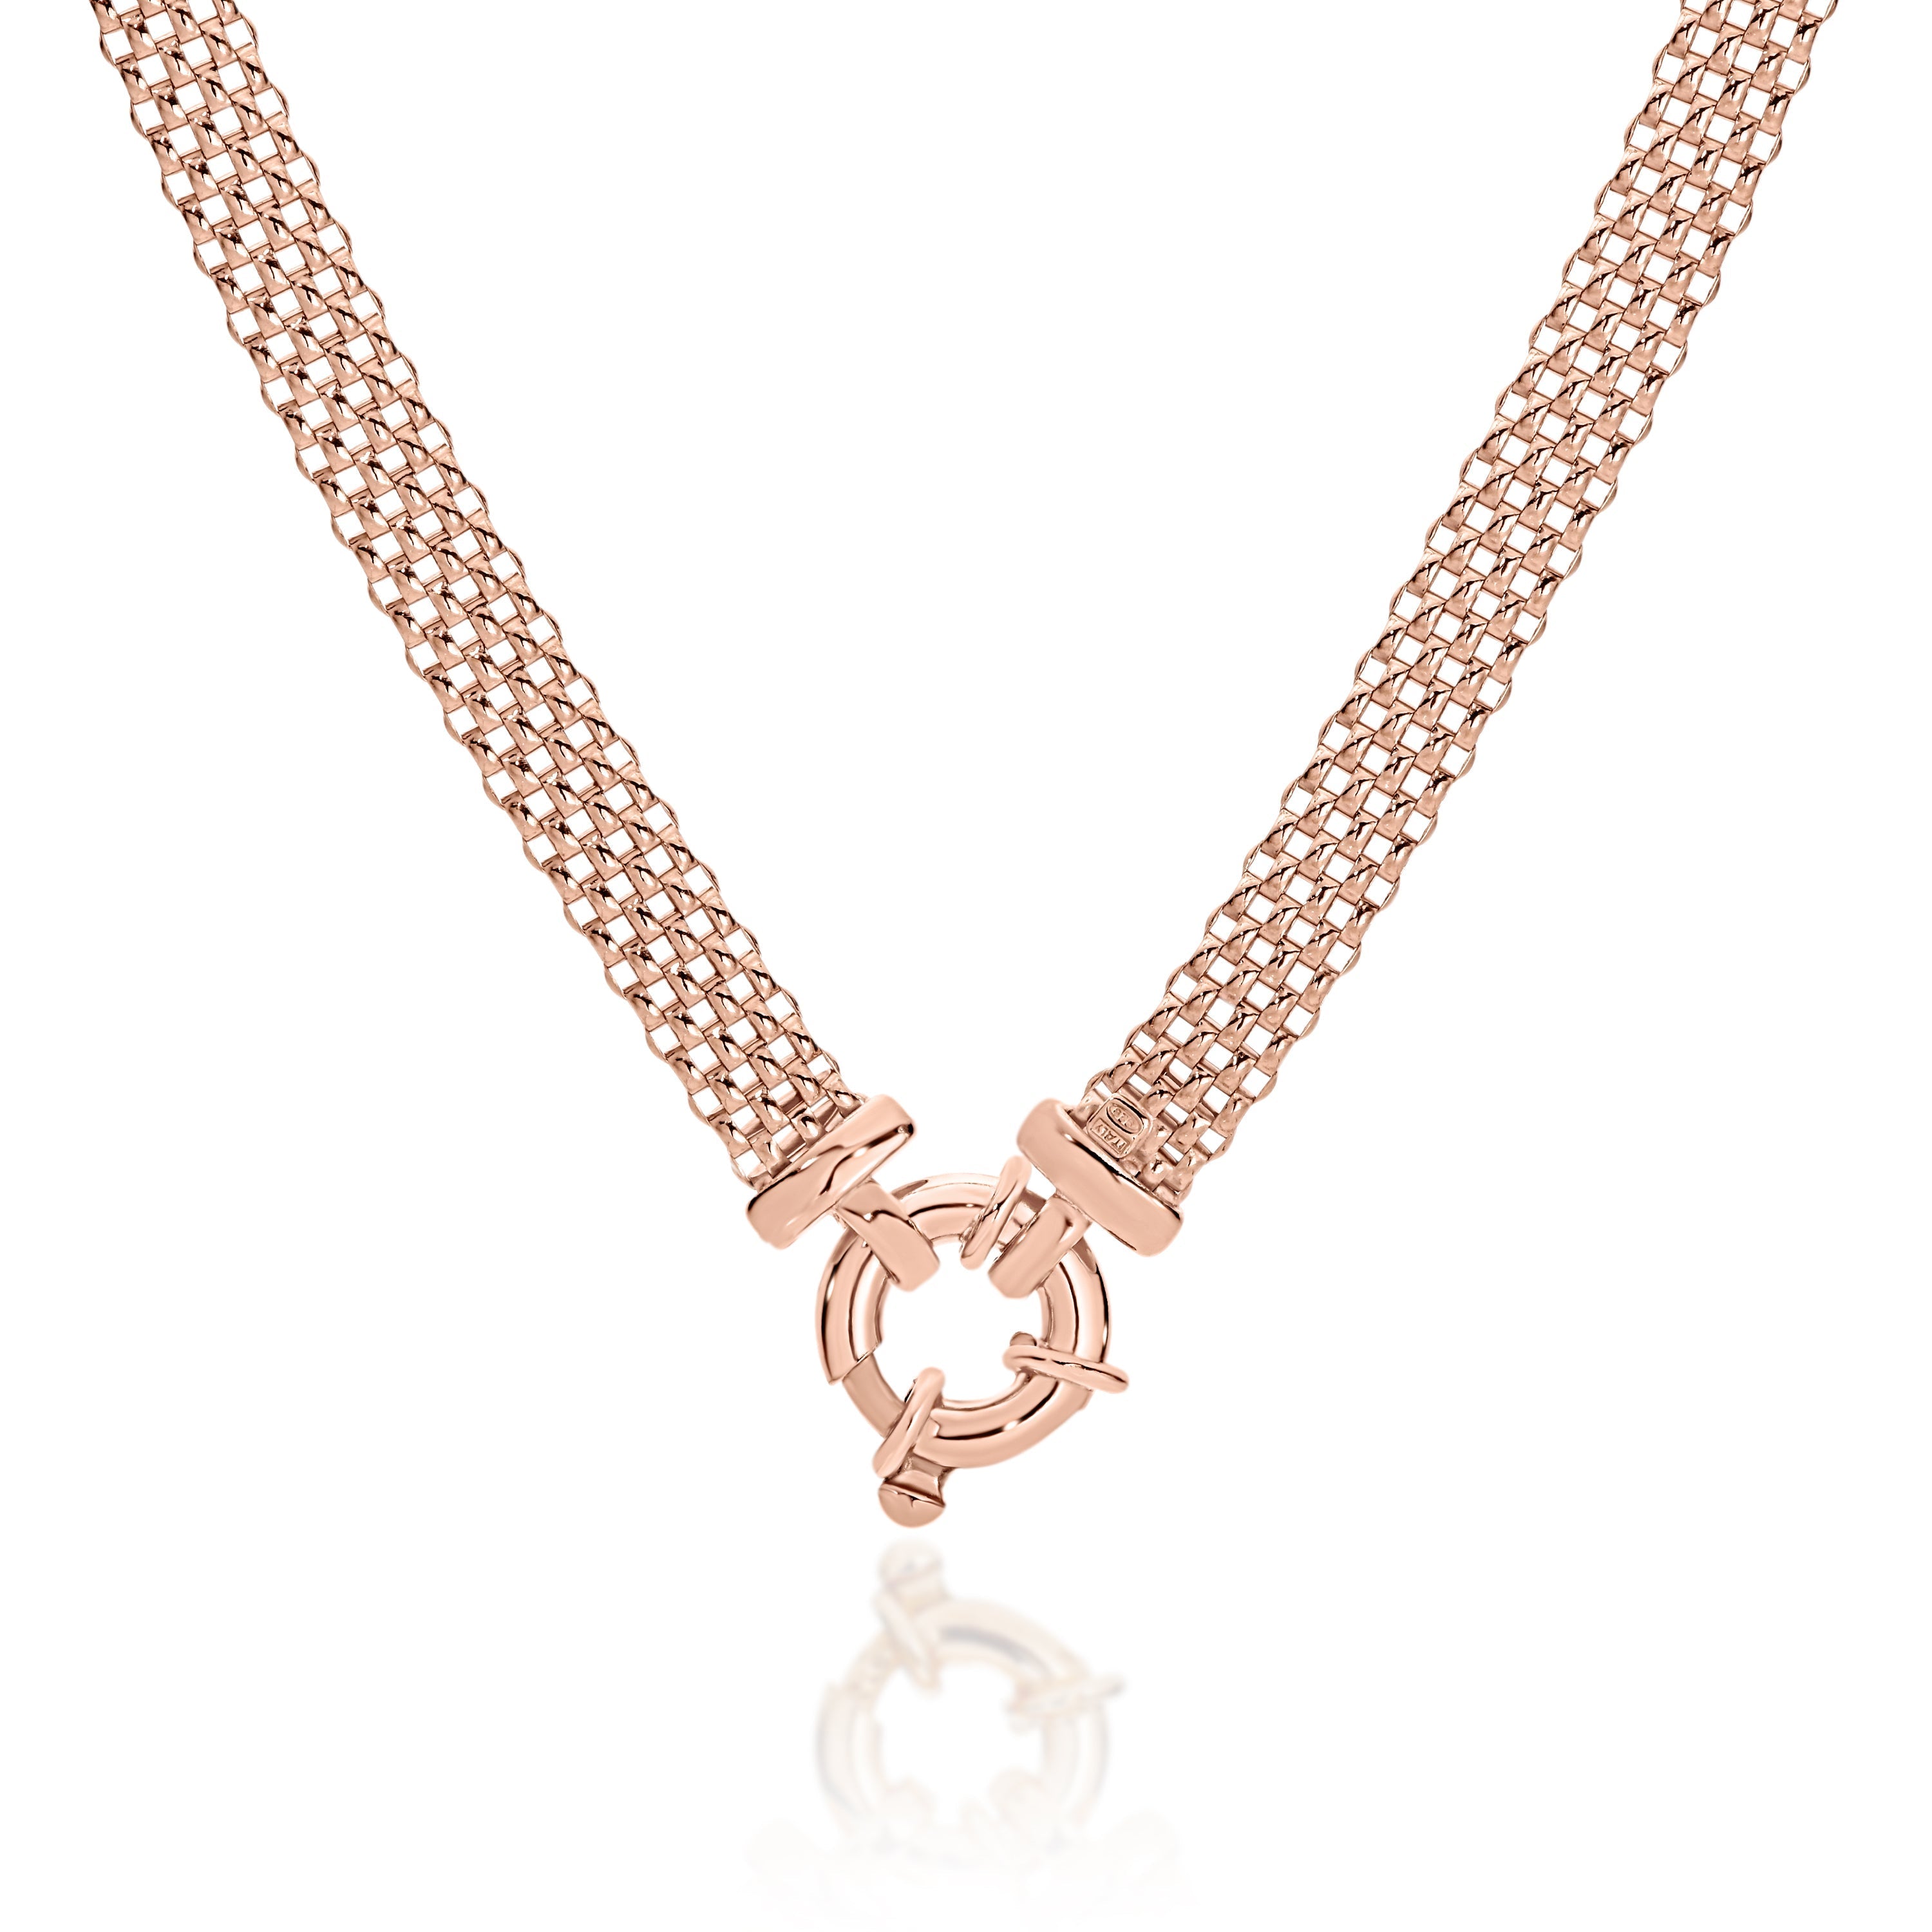 Silver rose gold plated popcorn necklace